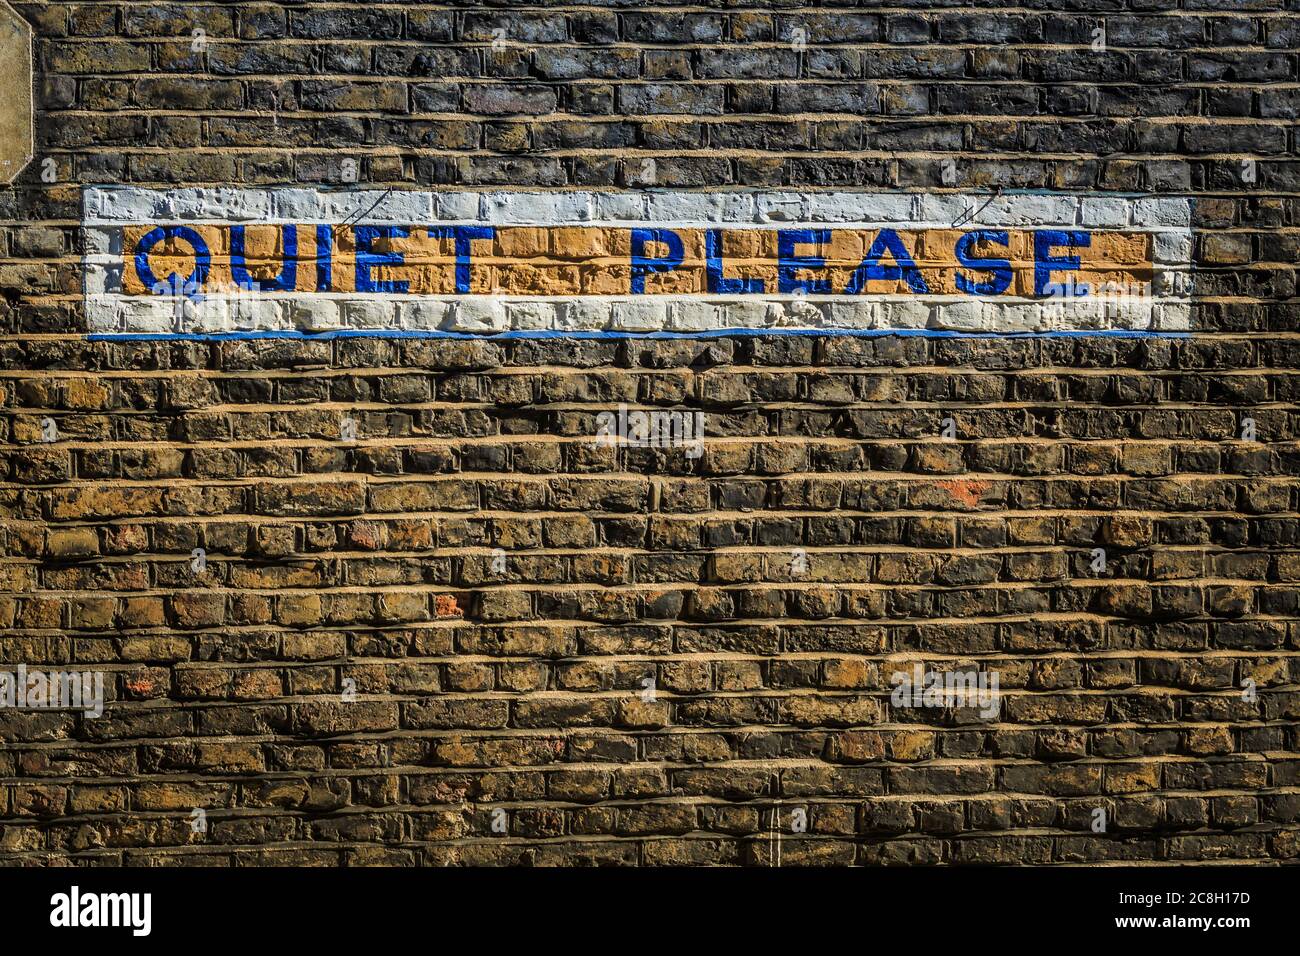 Grungy brick wall with the words 'Quiet Please' painted/written in block letters on a city wall.  Taken in London. Stock Photo